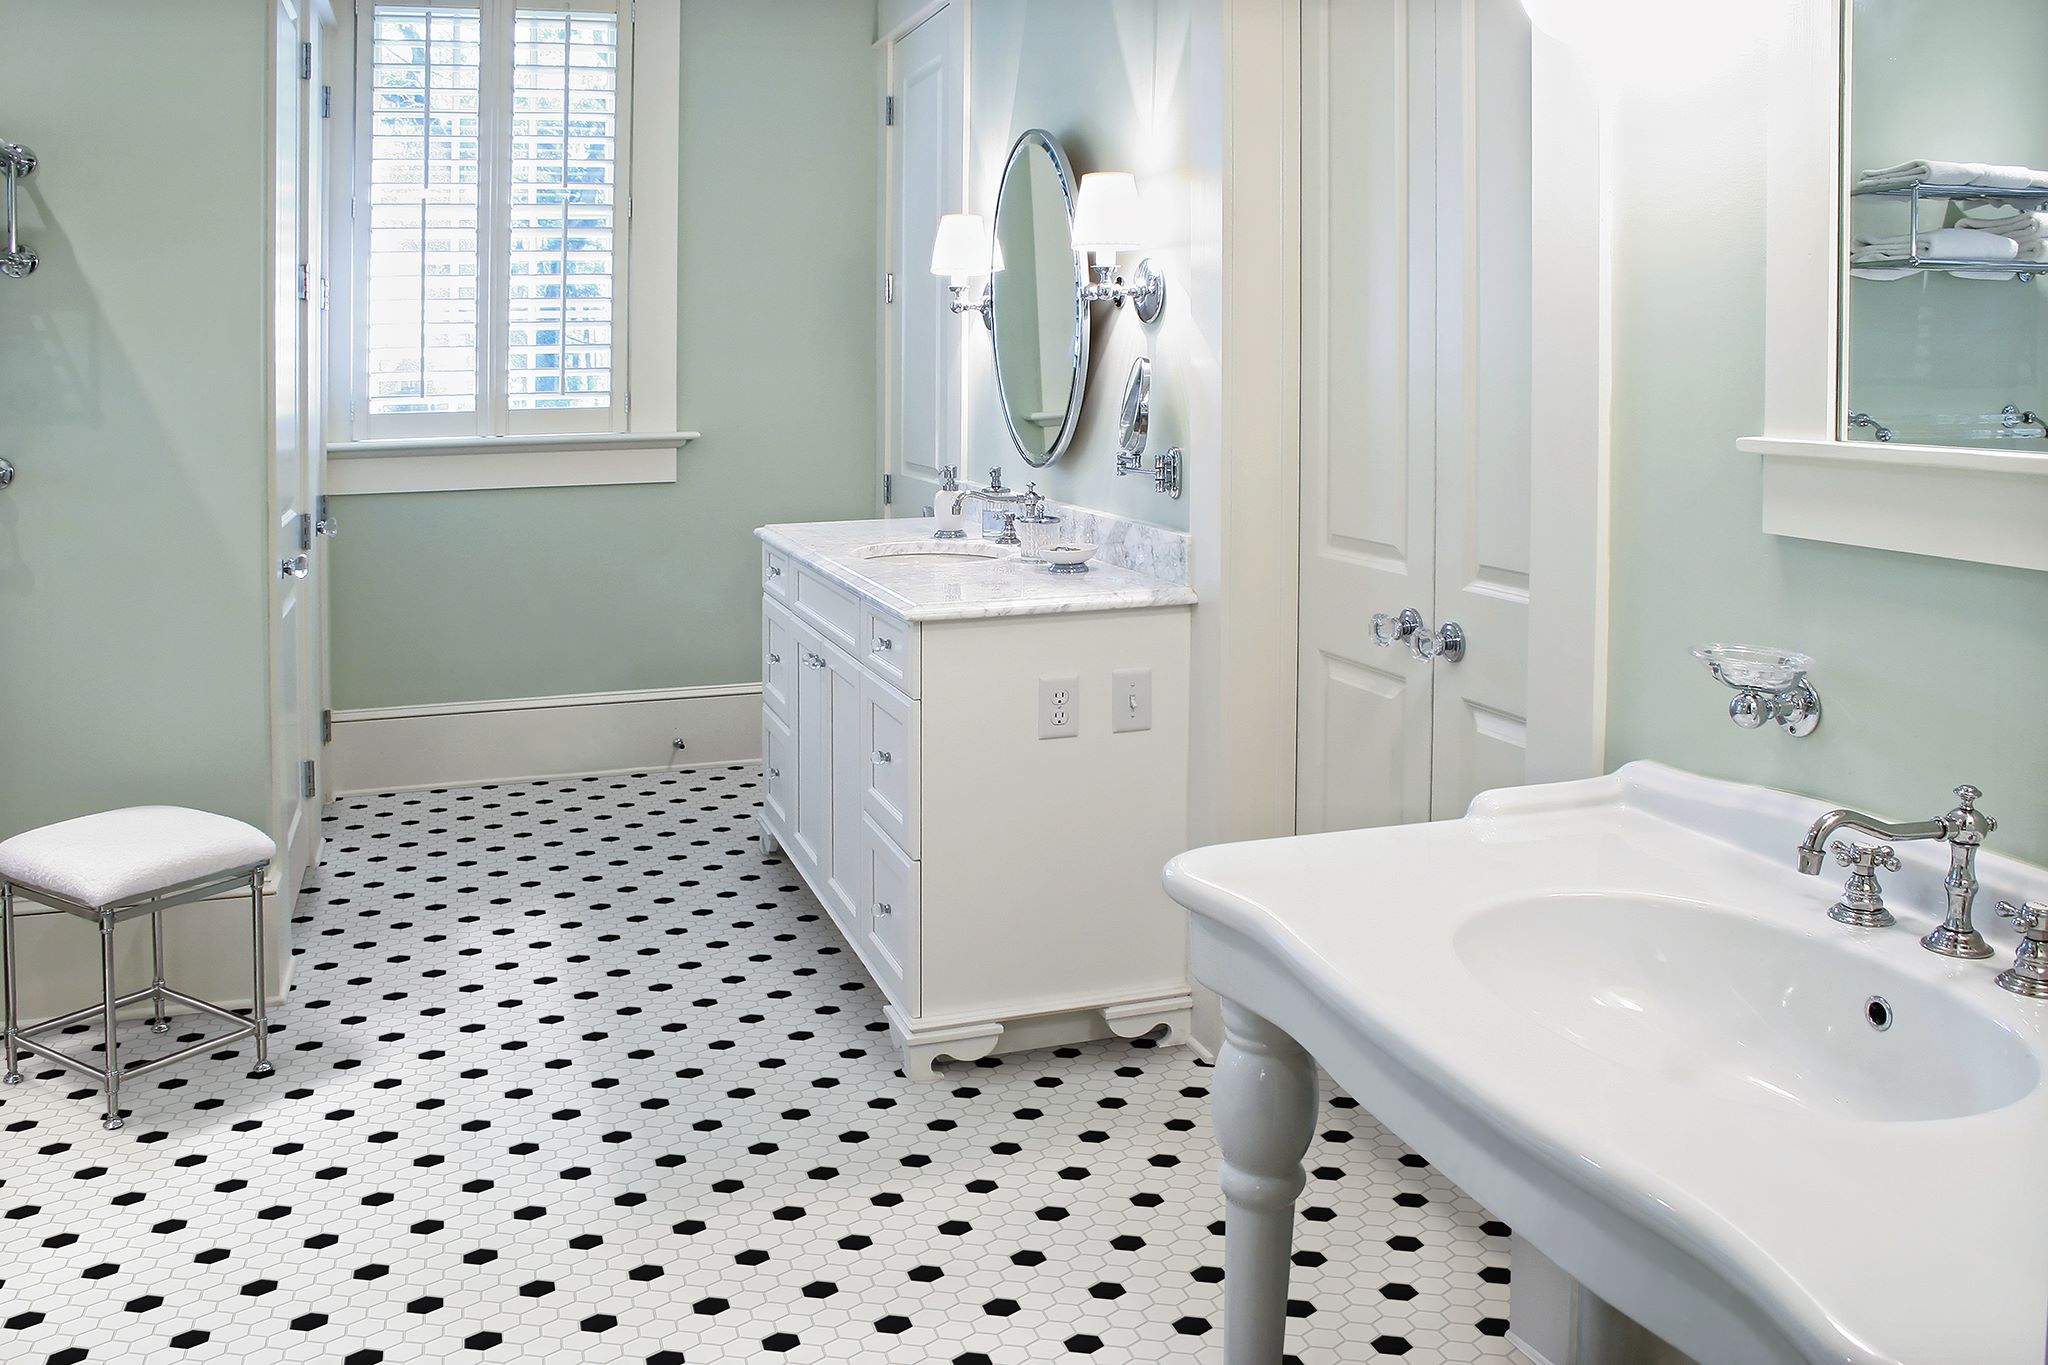 TRADITIONS_6_G | Gemini Tile and Marble